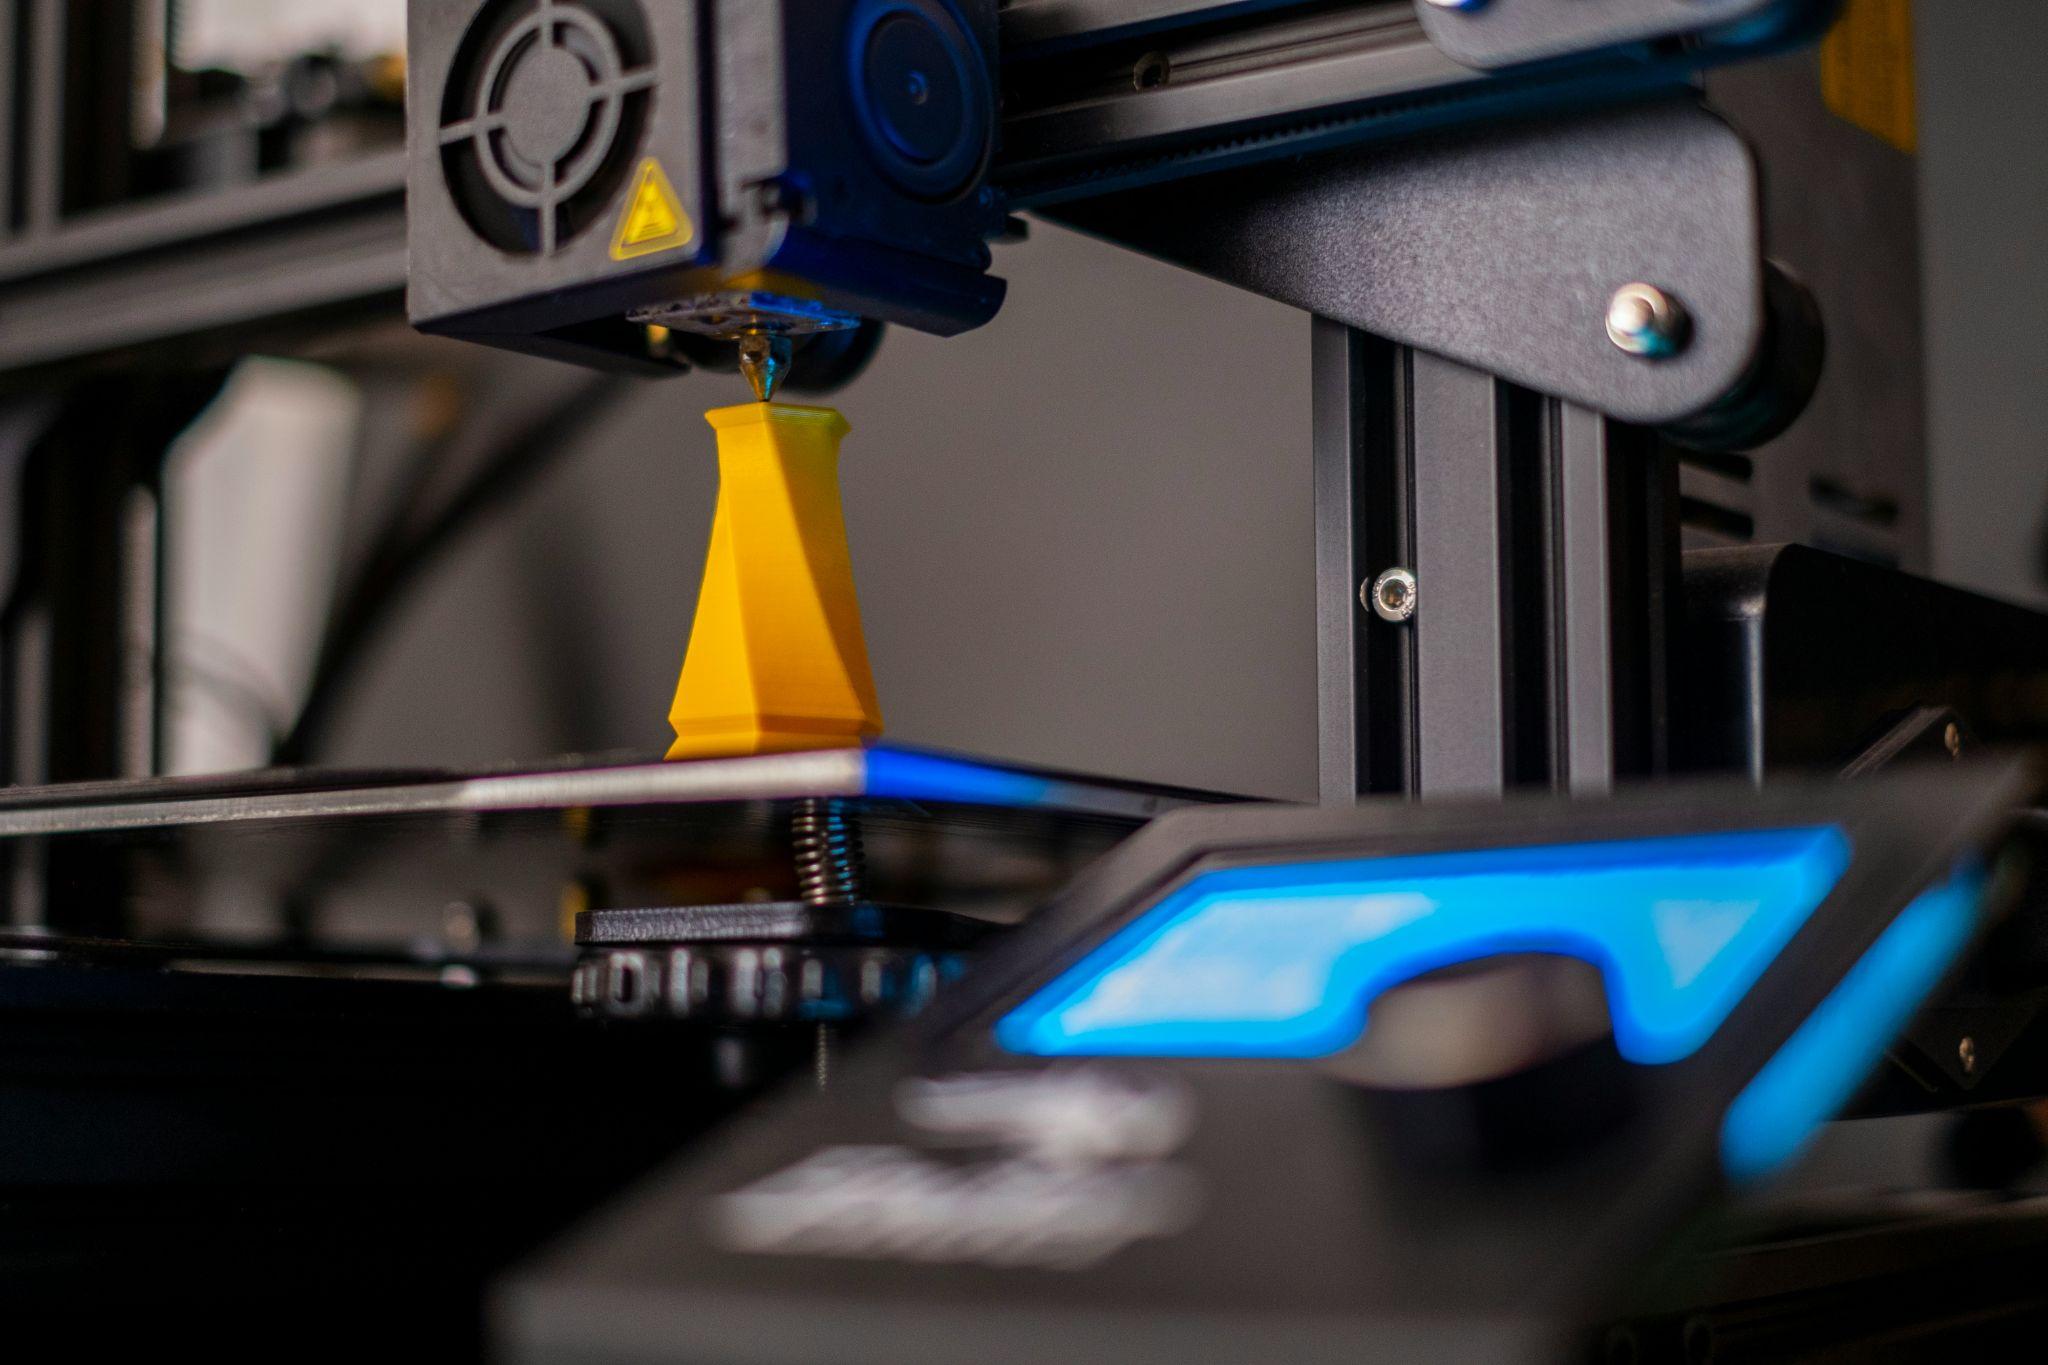 What Are the Advantages of 3D Printing Over Injection Molding?